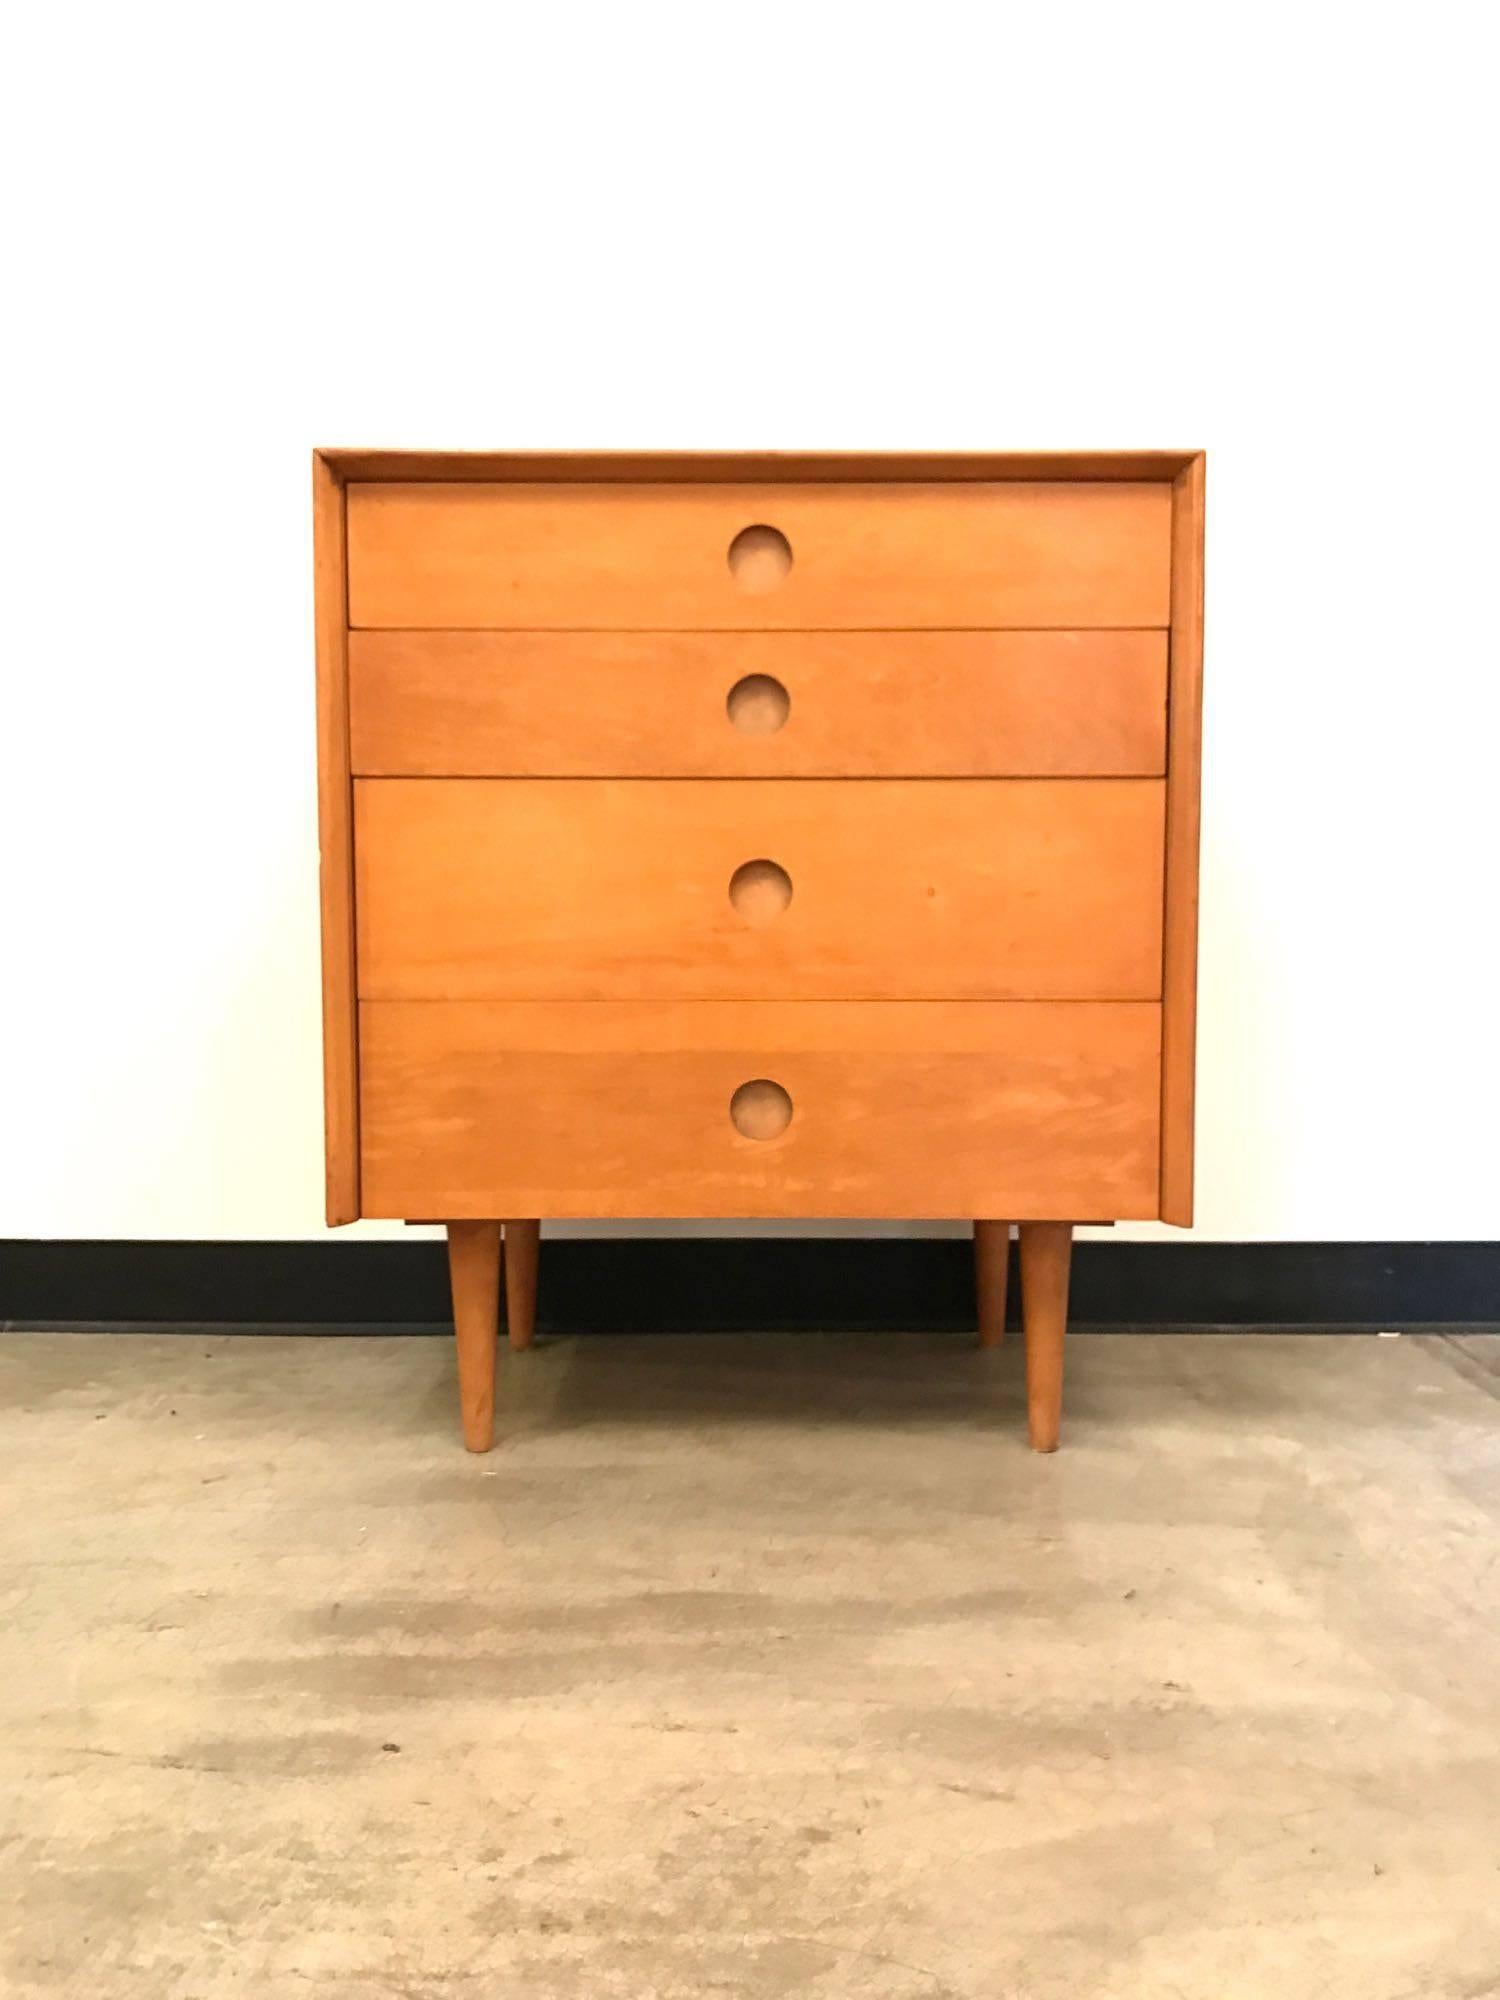 Designer: Clifford Pascoe 
Period/style: Mid-Century Modern 
Country: Unknown 
Date: 1950s.

Refinishing recommended. Top on one chest has issues. 